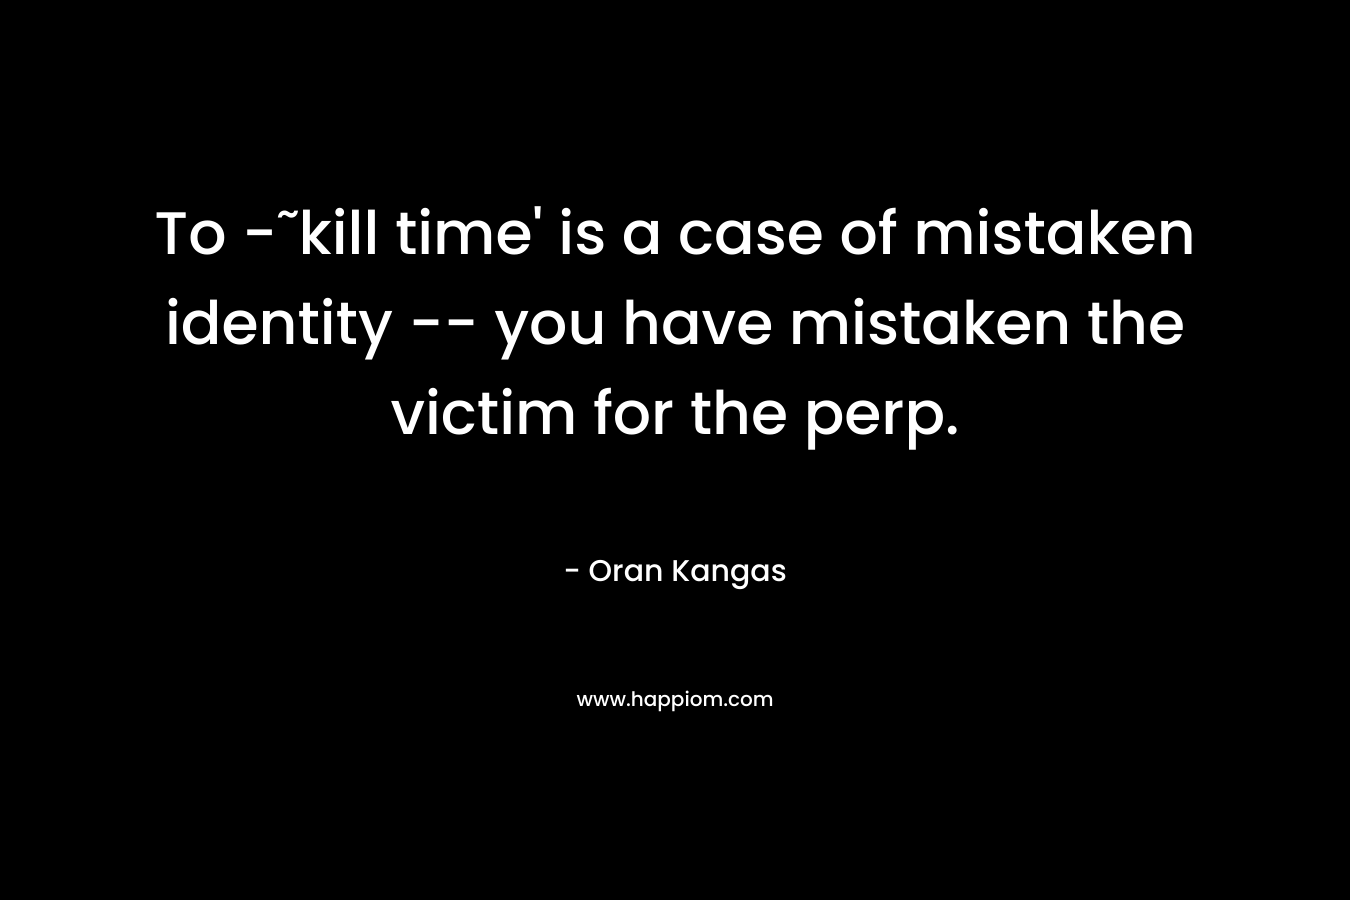 To -˜kill time' is a case of mistaken identity -- you have mistaken the victim for the perp.